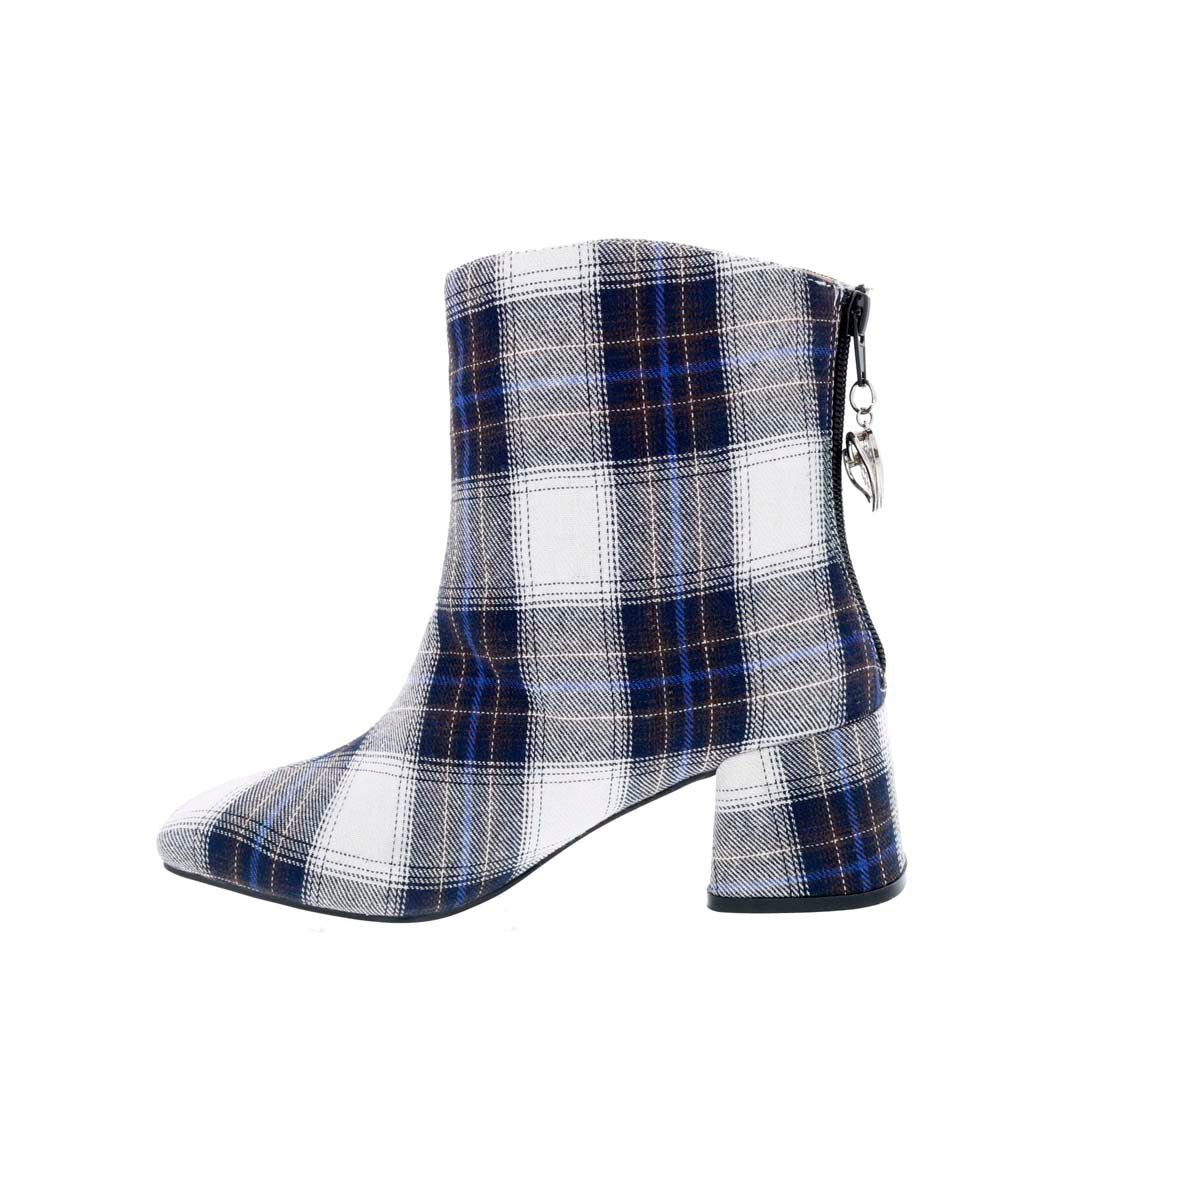 PENNY LOVES KENNY TUCK WOMEN BOOT IN WHITE PLAID - TLW Shoes